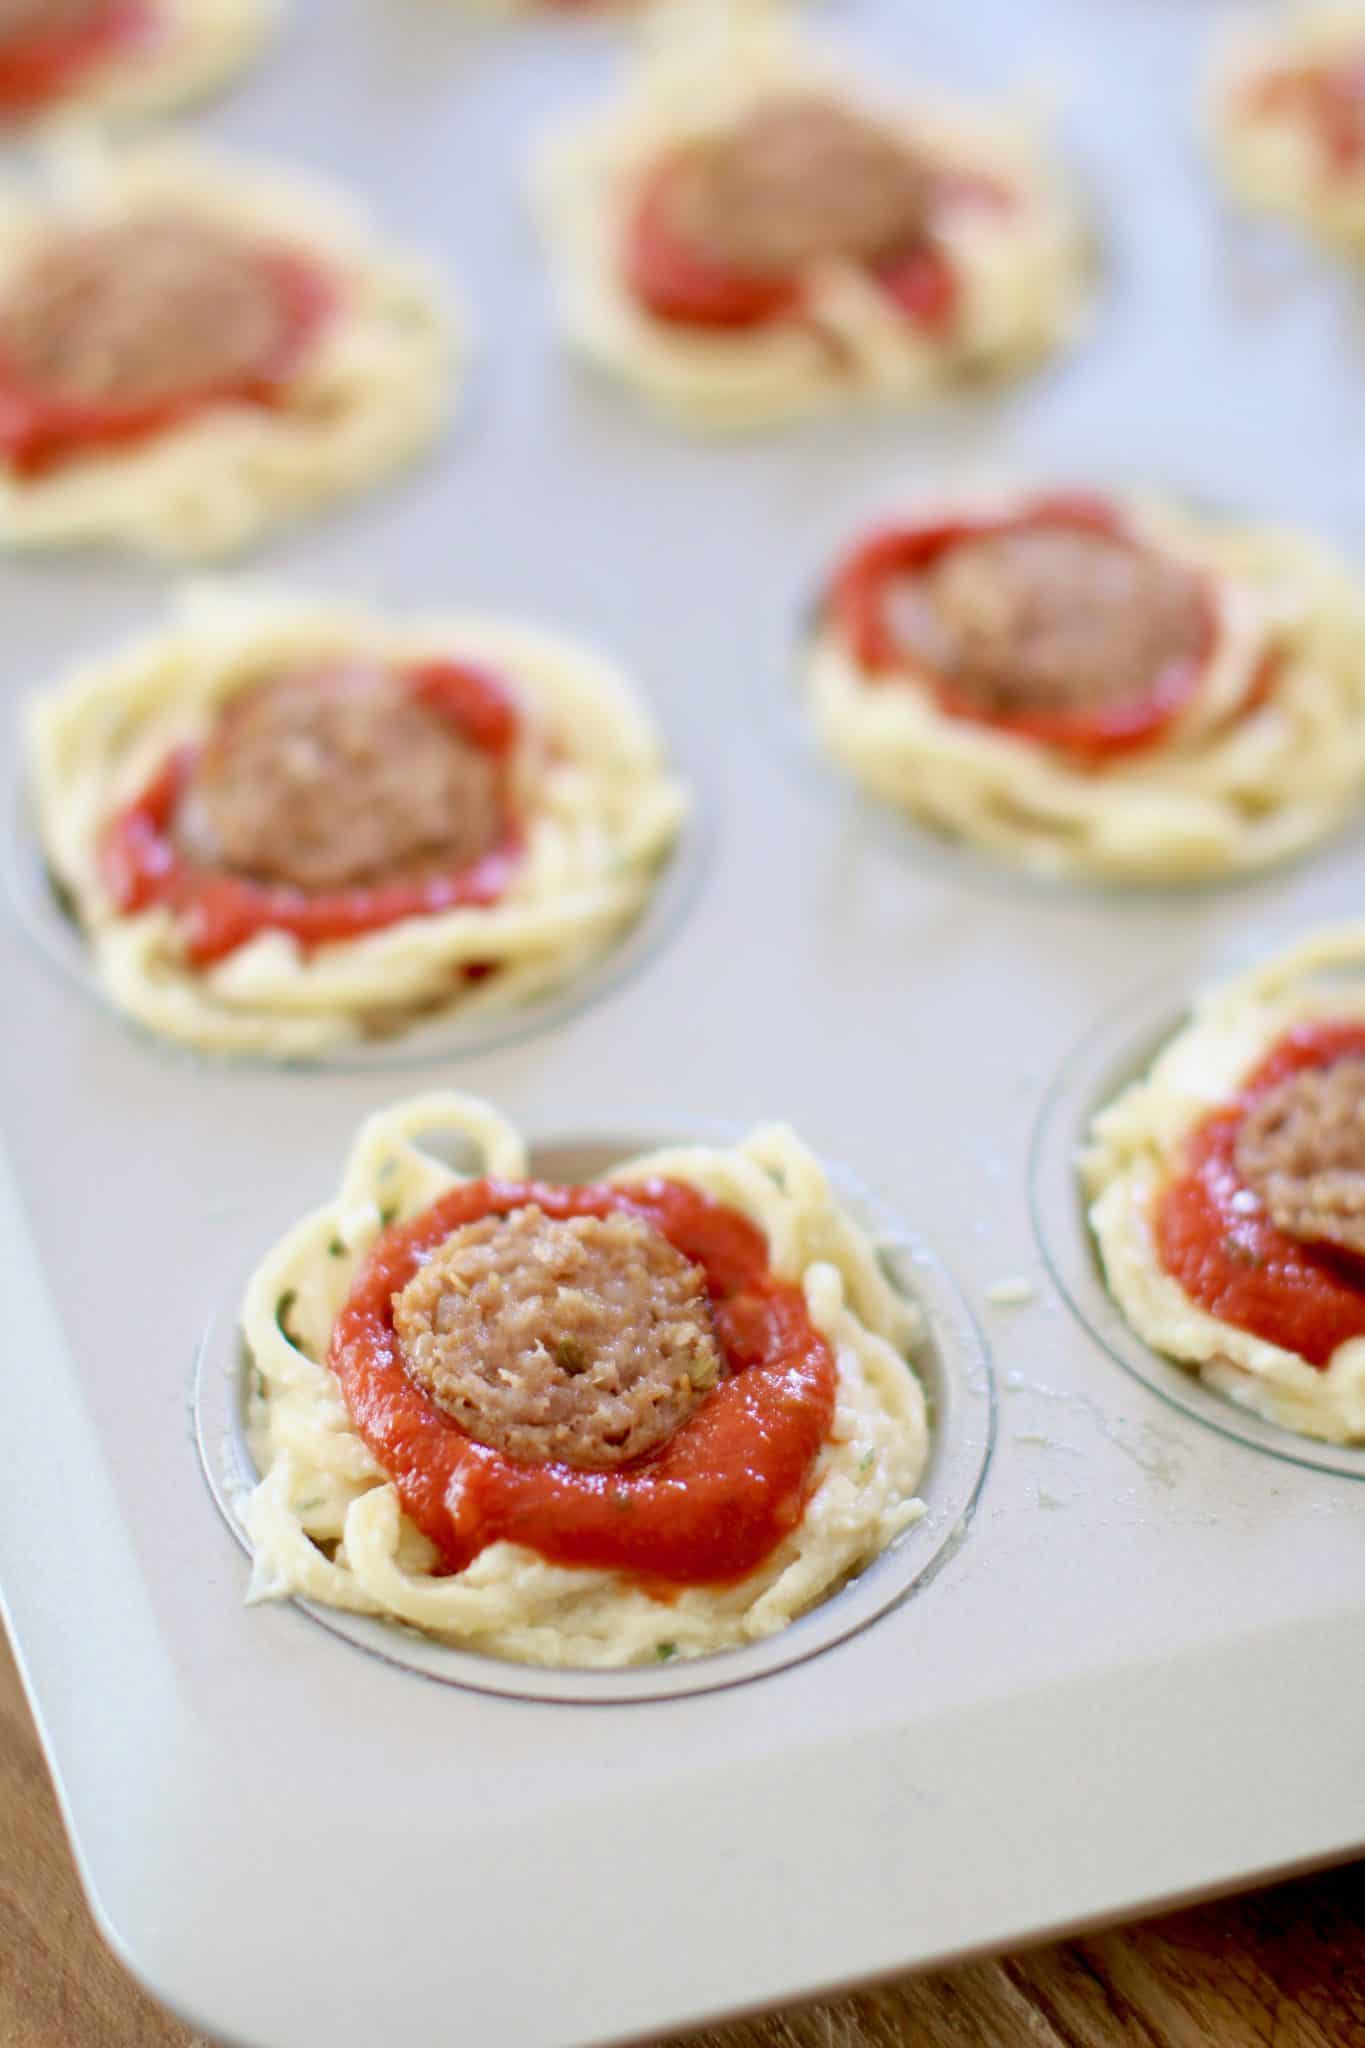 spaghetti nests, spaghetti sauce and sliced sausage in a muffin pan (before baking)